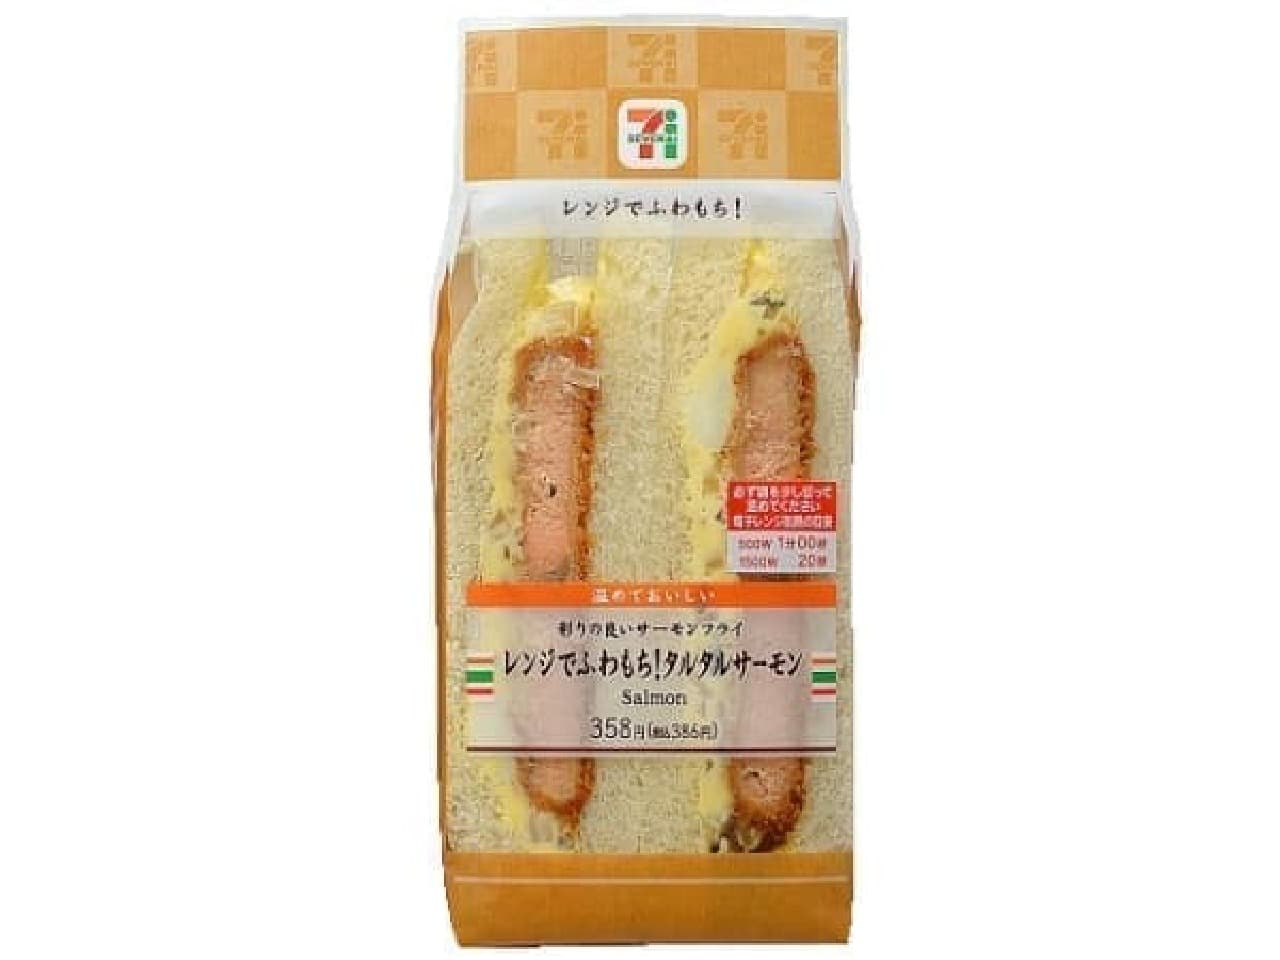 7-ELEVEN "Fluffy in the microwave! Tartar salmon"